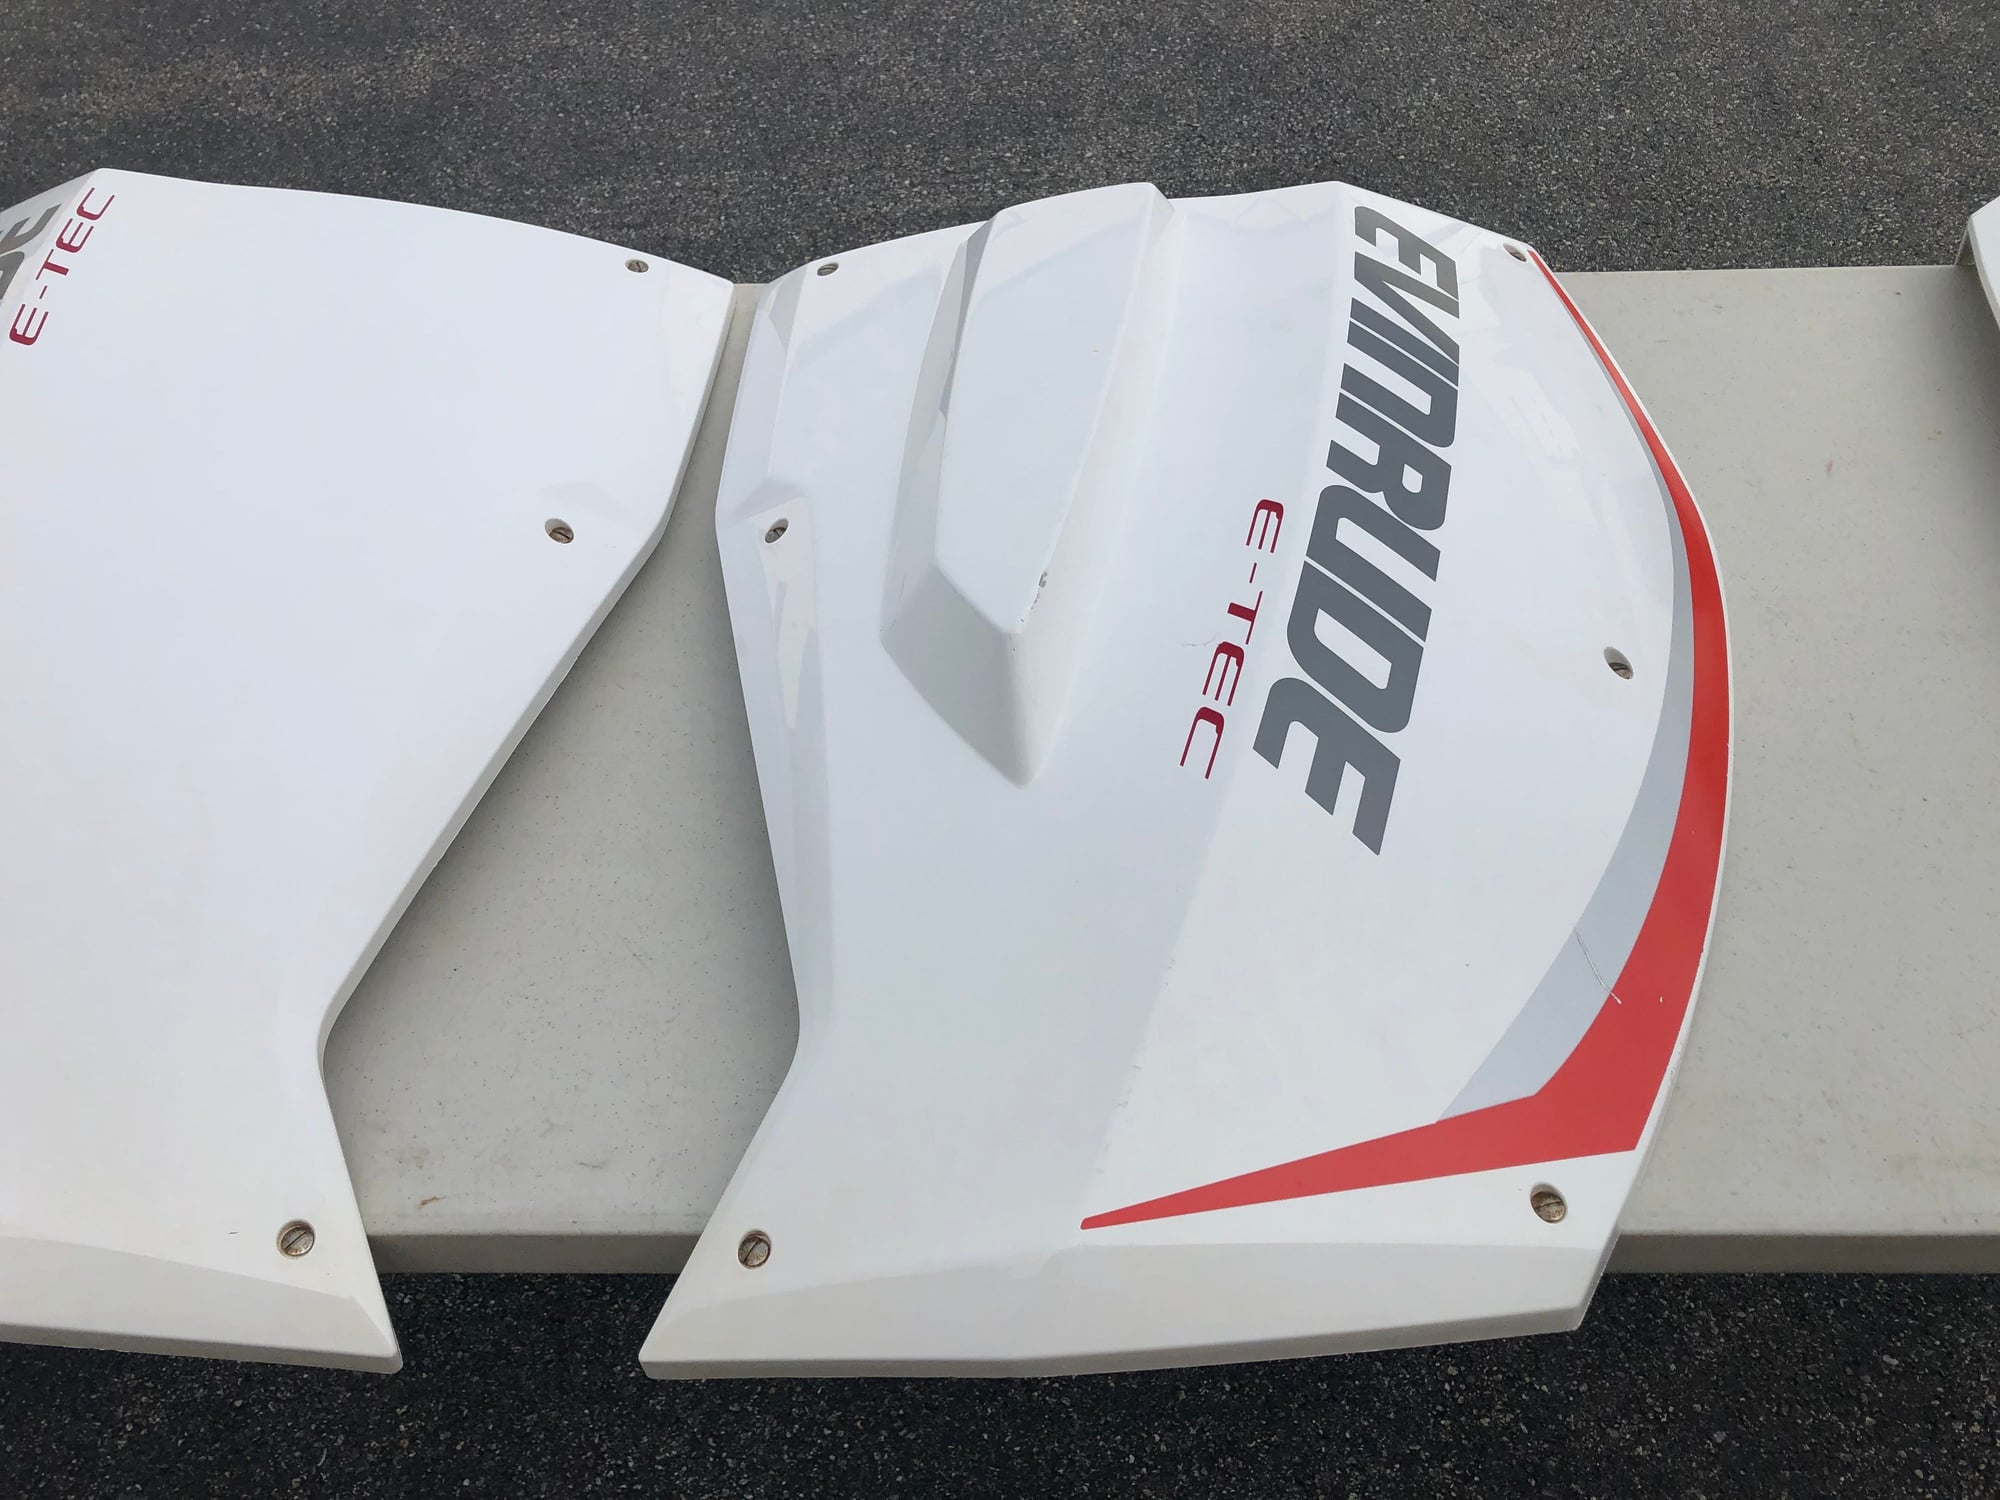 evinrude g2 review the hull truth